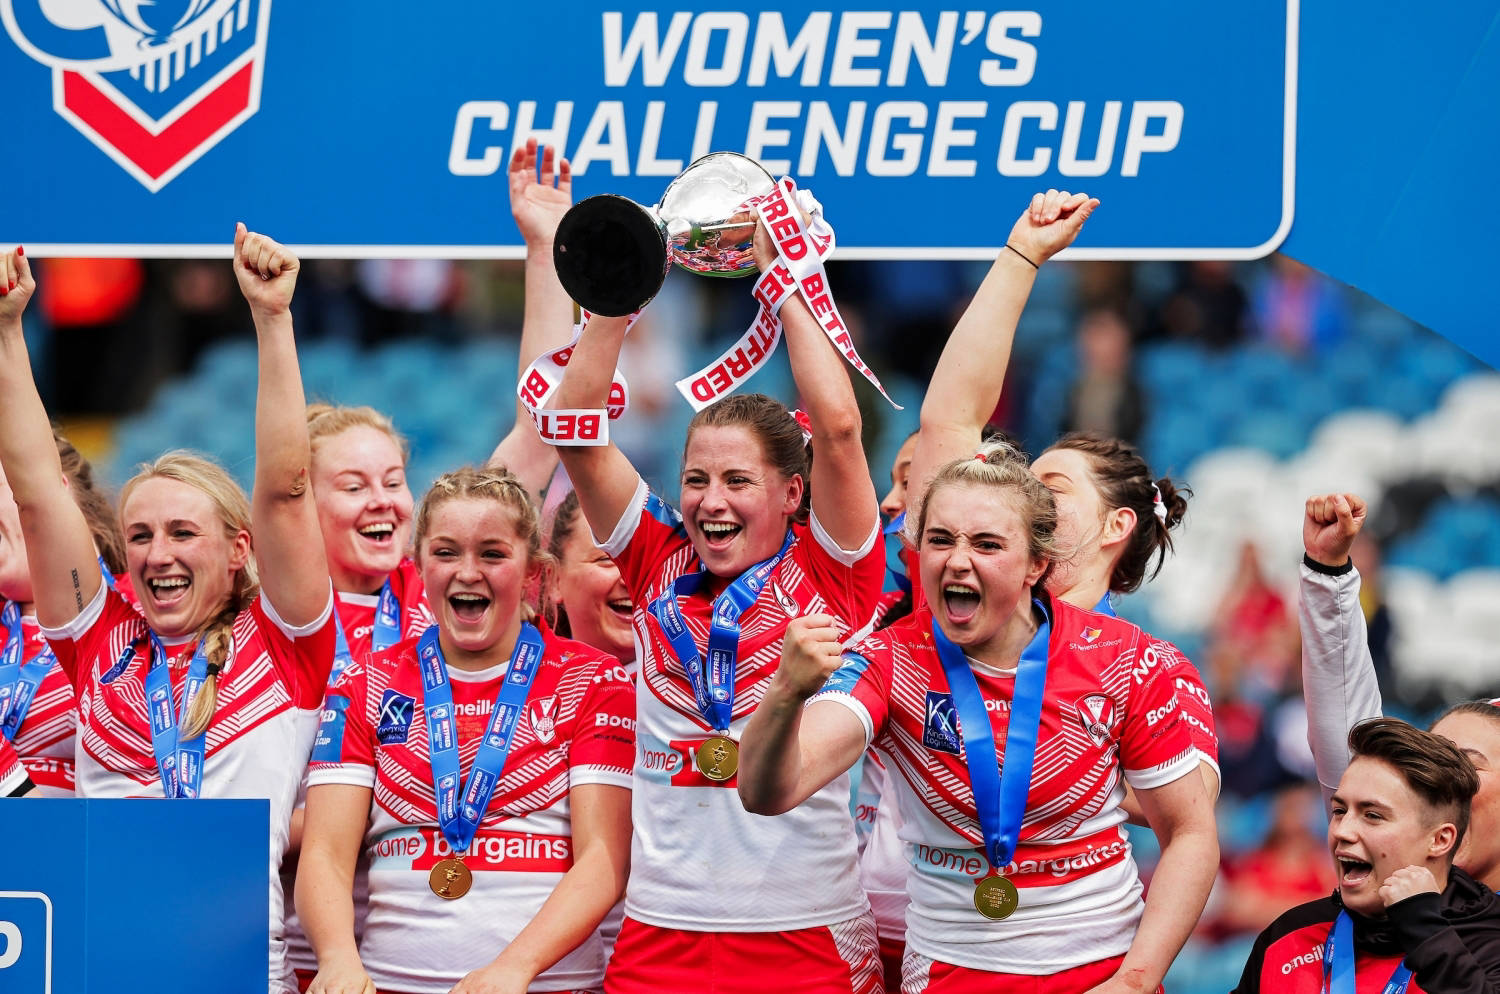 St Helens retain Women's Challenge Cup in front of record UK crowd